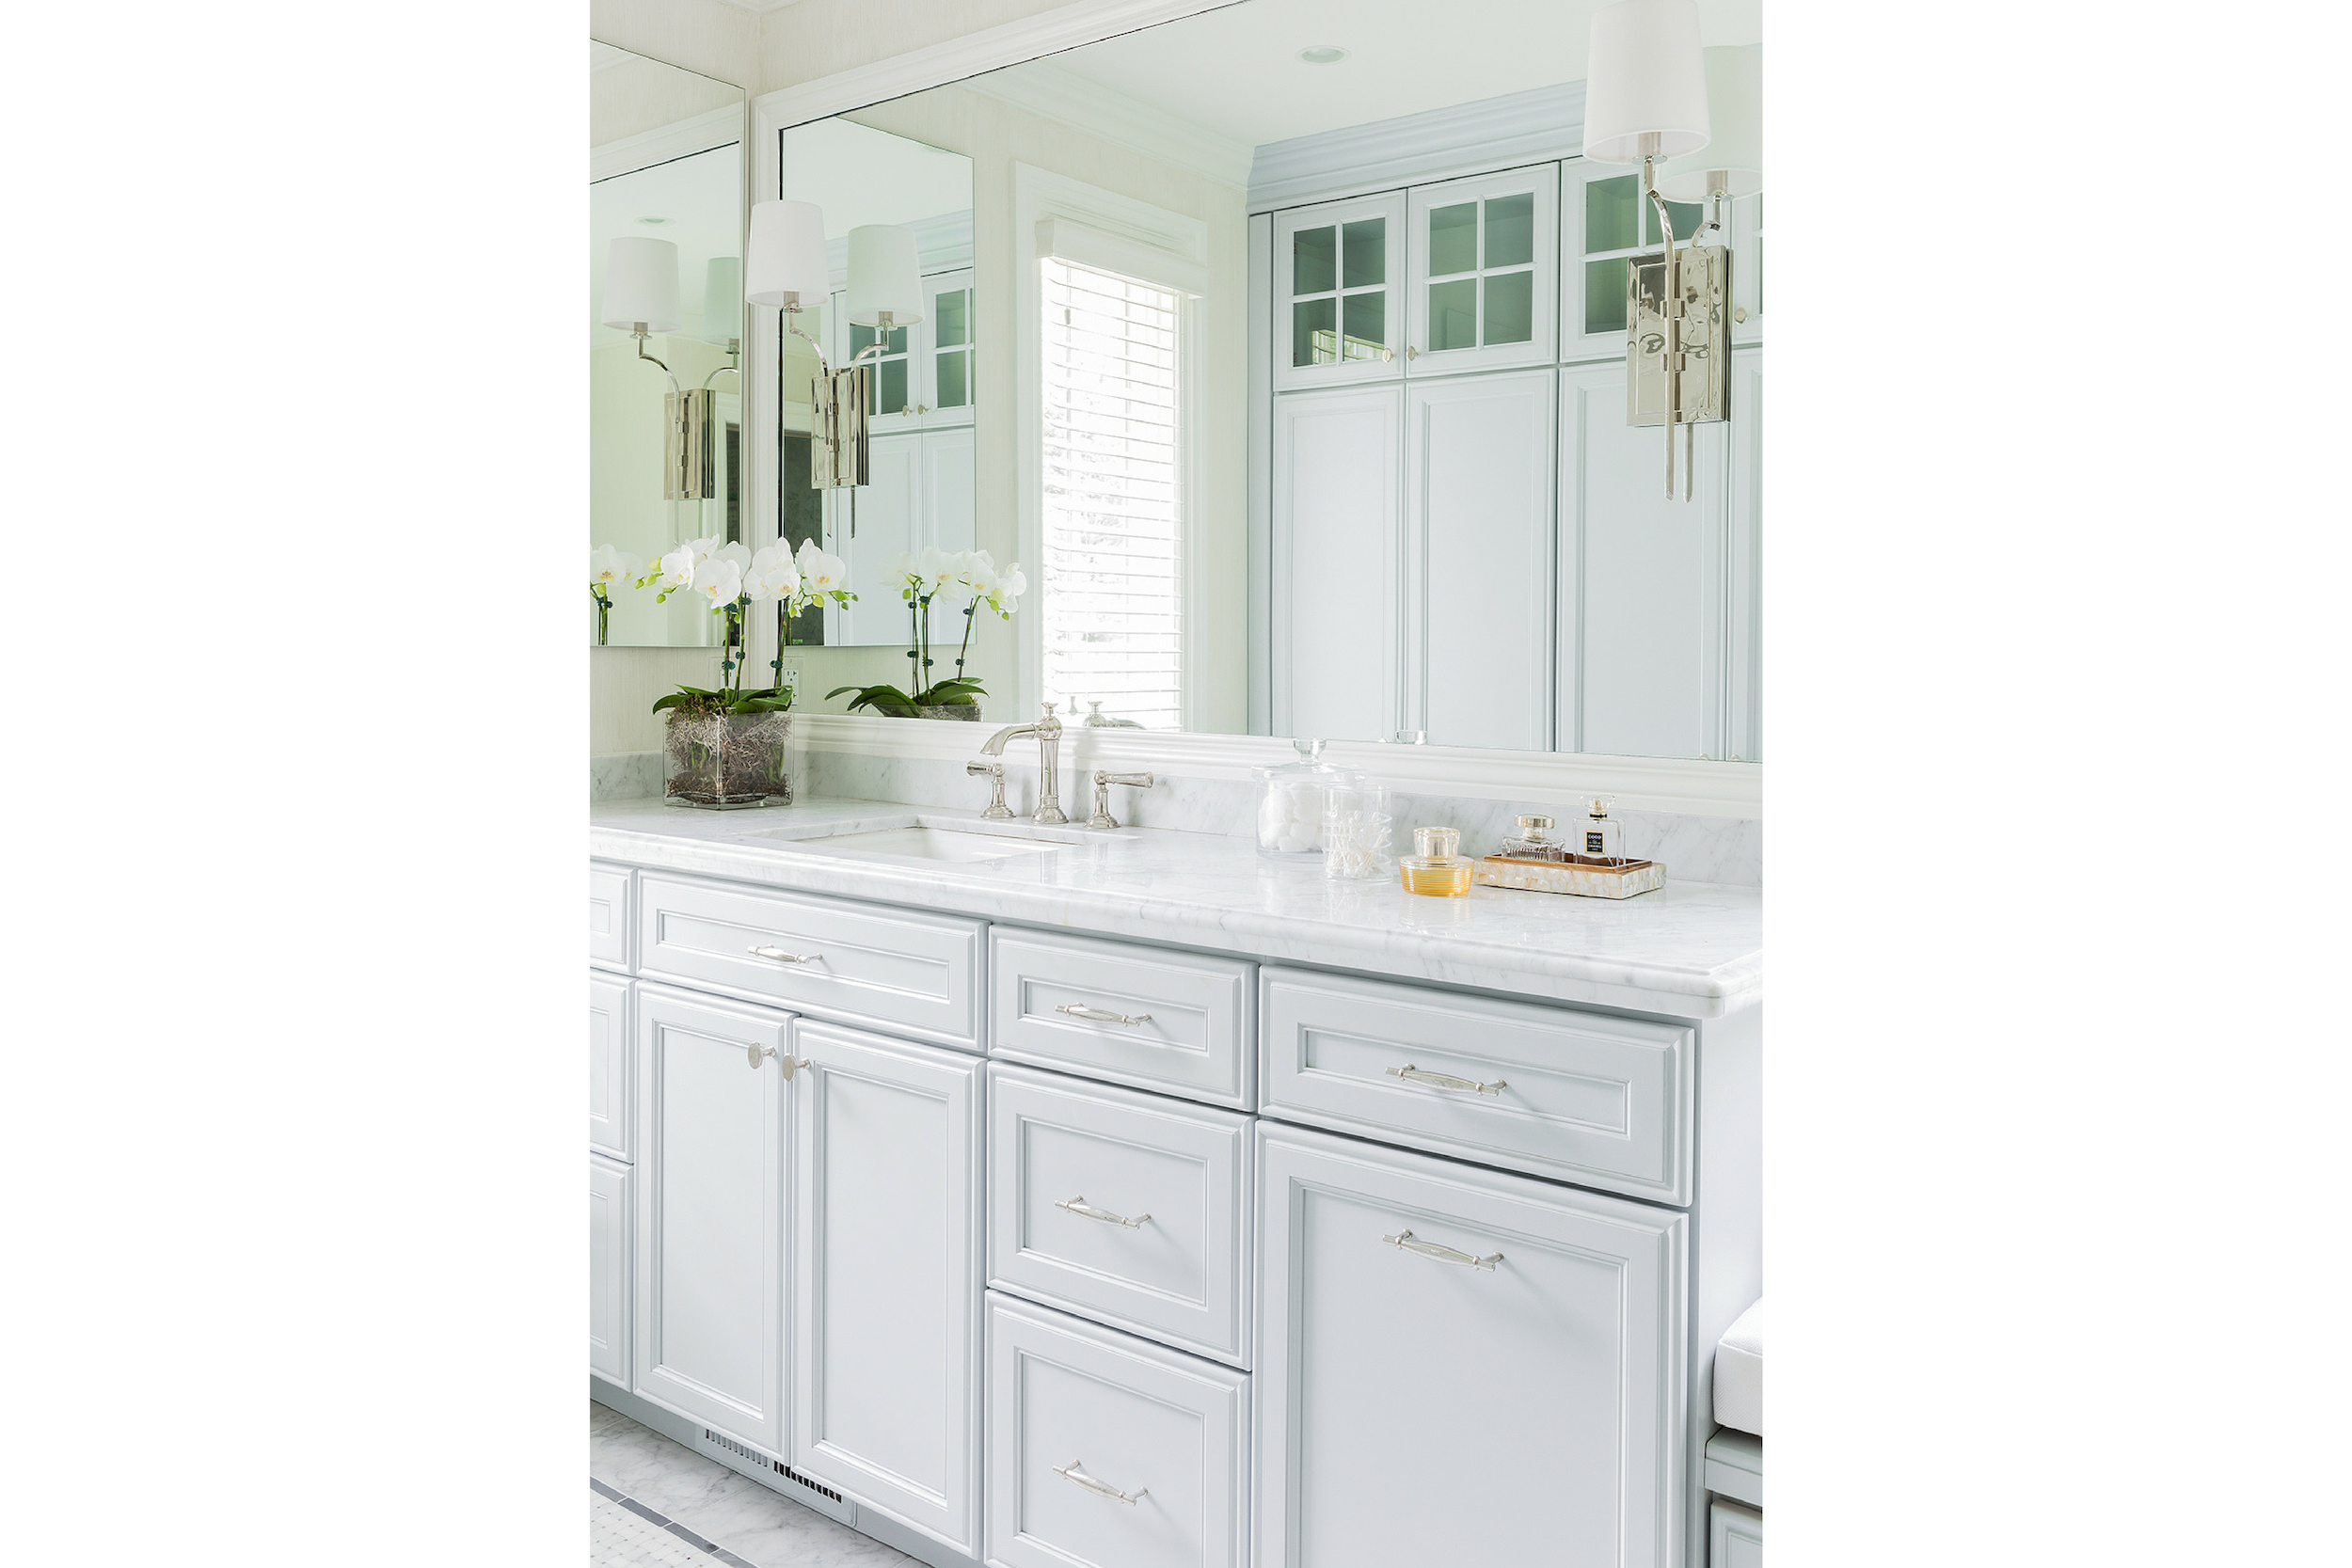 KitchenVisions-Hall-Guest-Baths-K8B0173.png